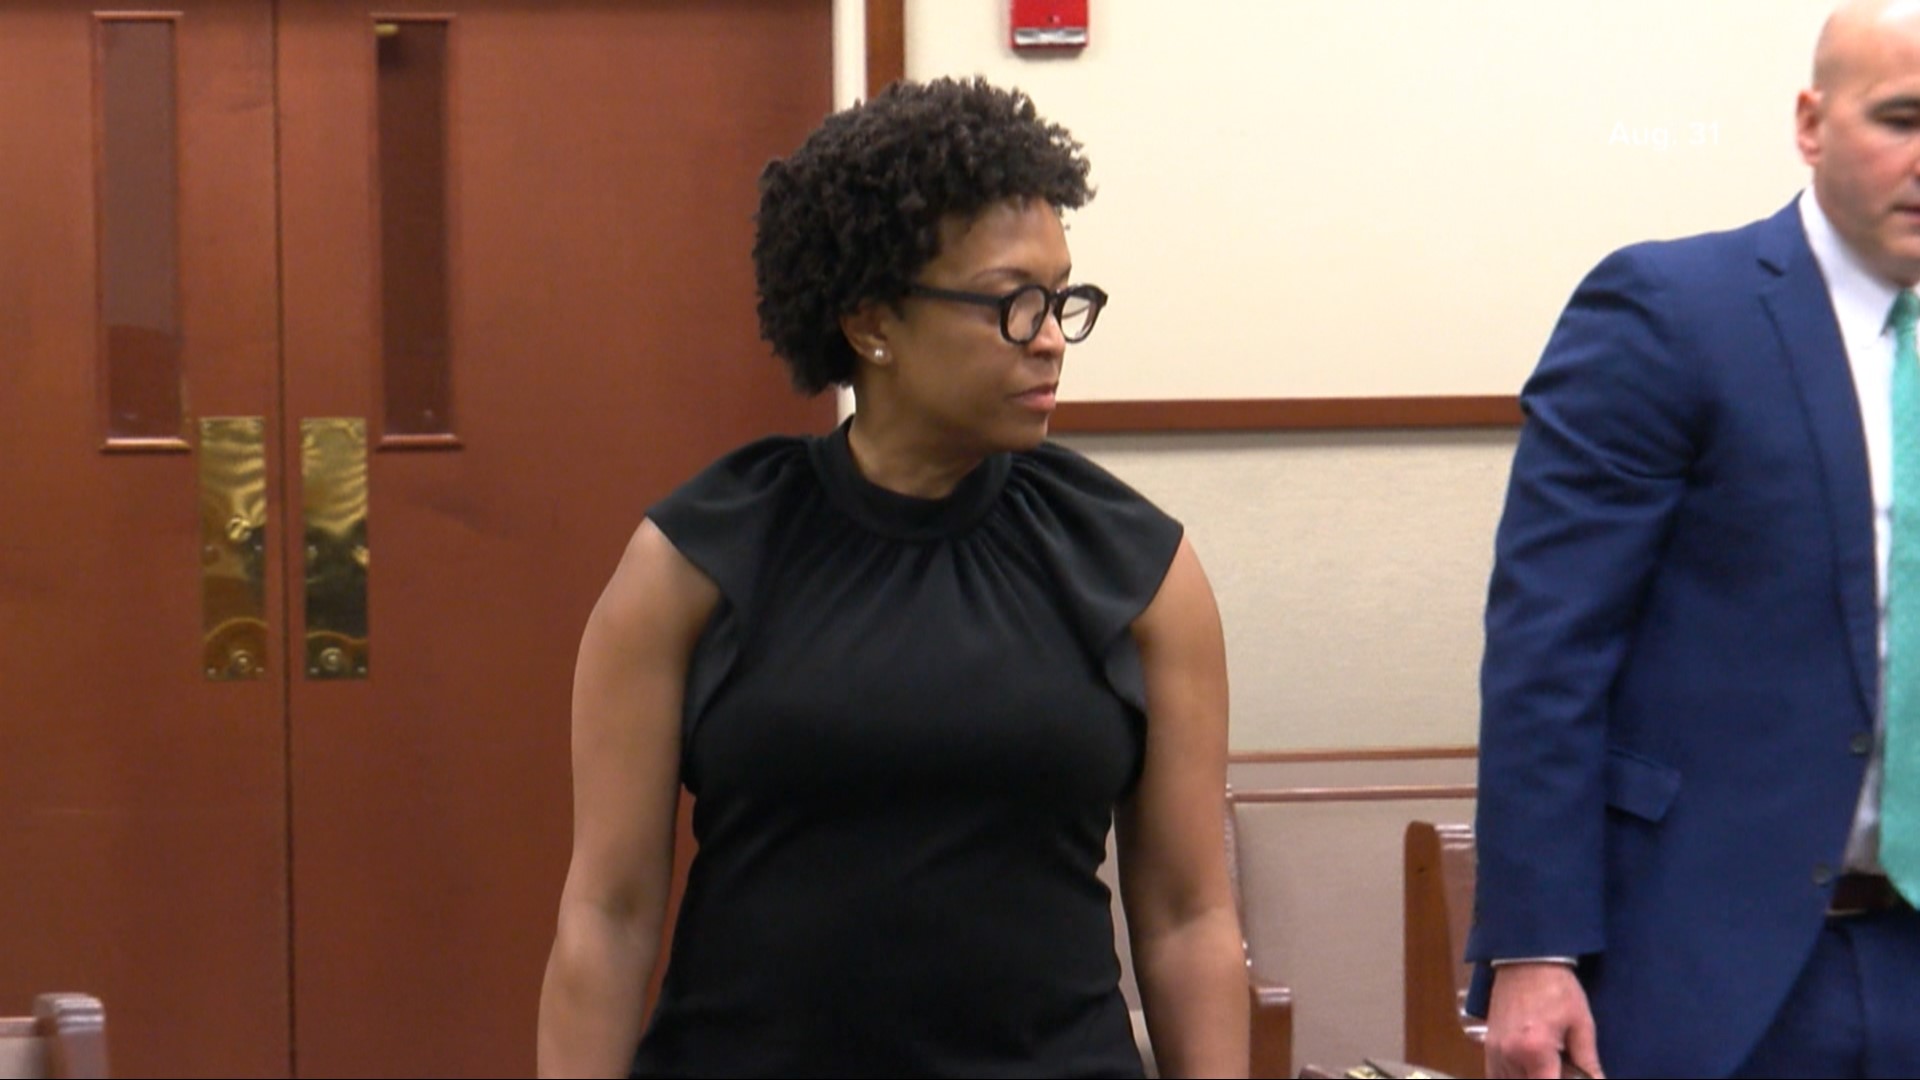 A circuit court judge ruled that Dr. Kish Cumi-Price, former CEO of the Louisville Urban League, will be allowed to continue her wrongful termination lawsuit.